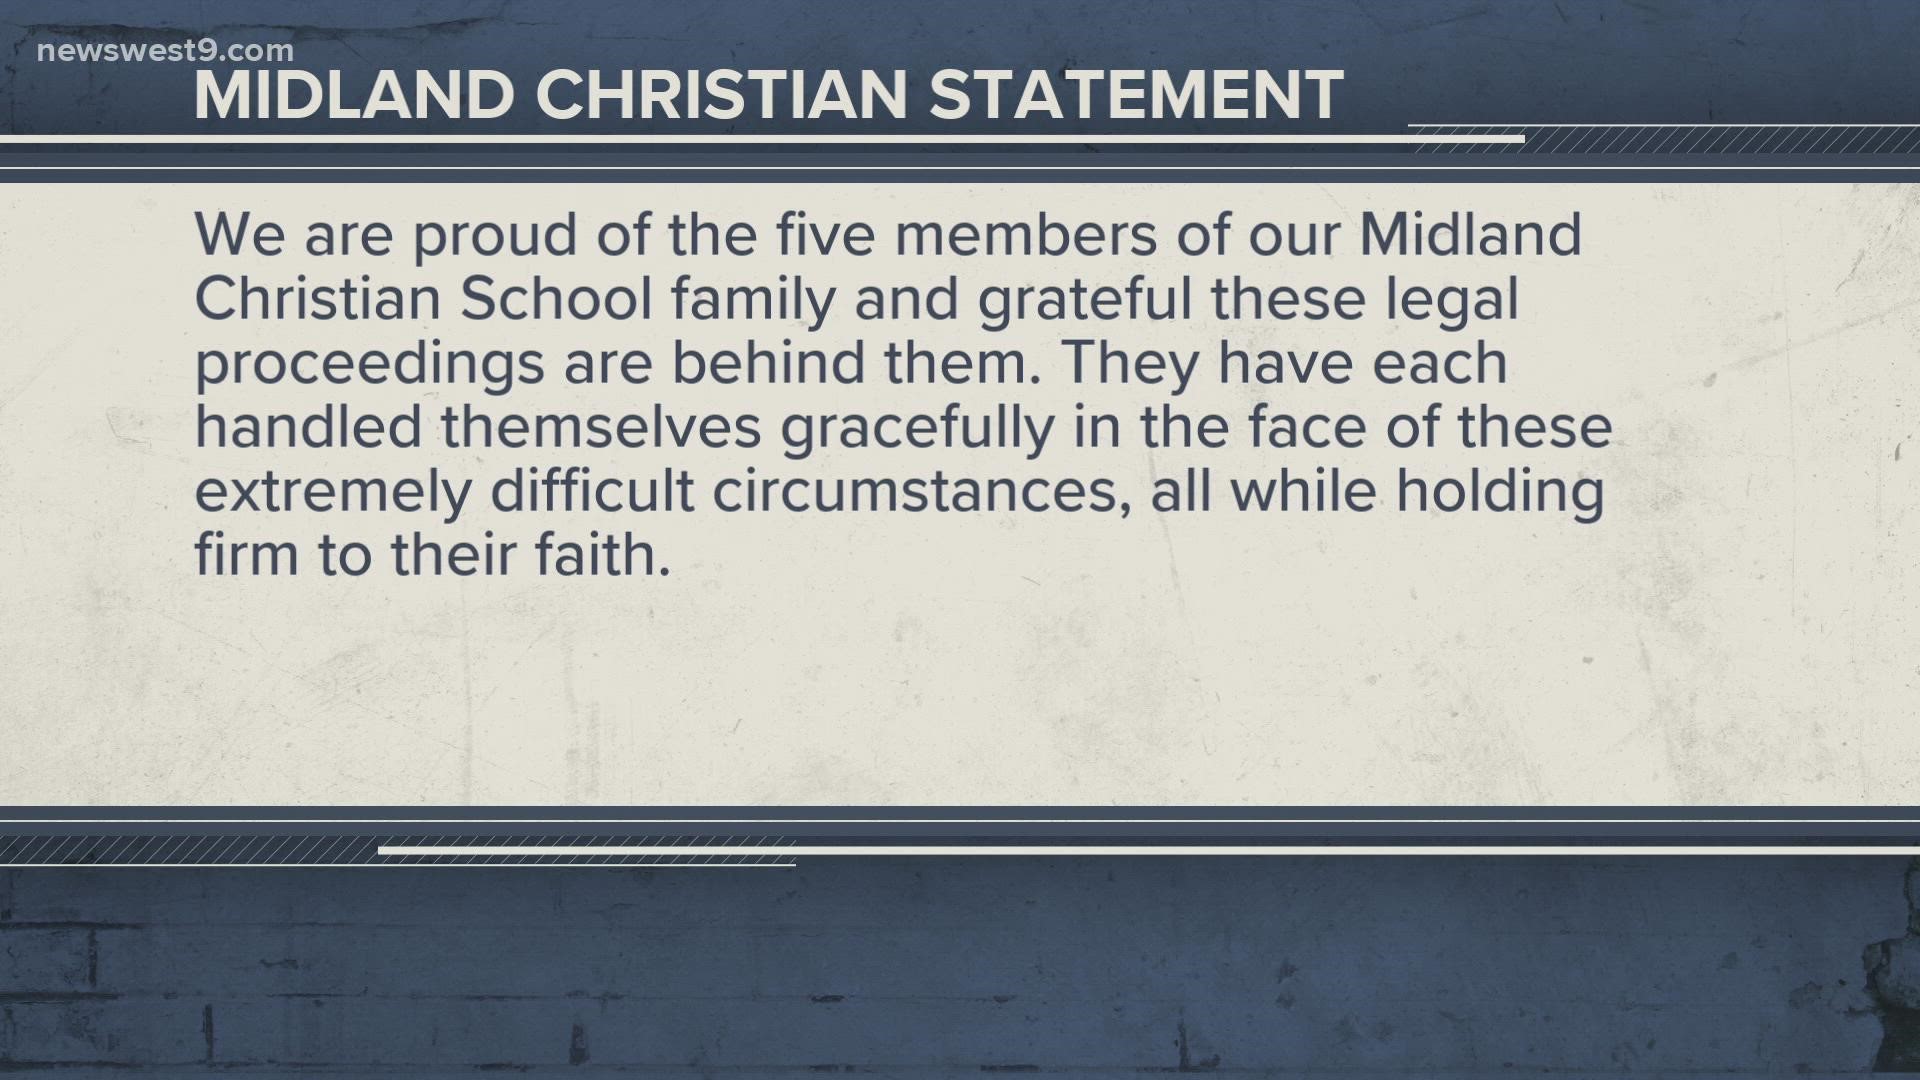 "We are proud of the five members of our Midland Christian School family and grateful these legal 
proceedings are behind them."